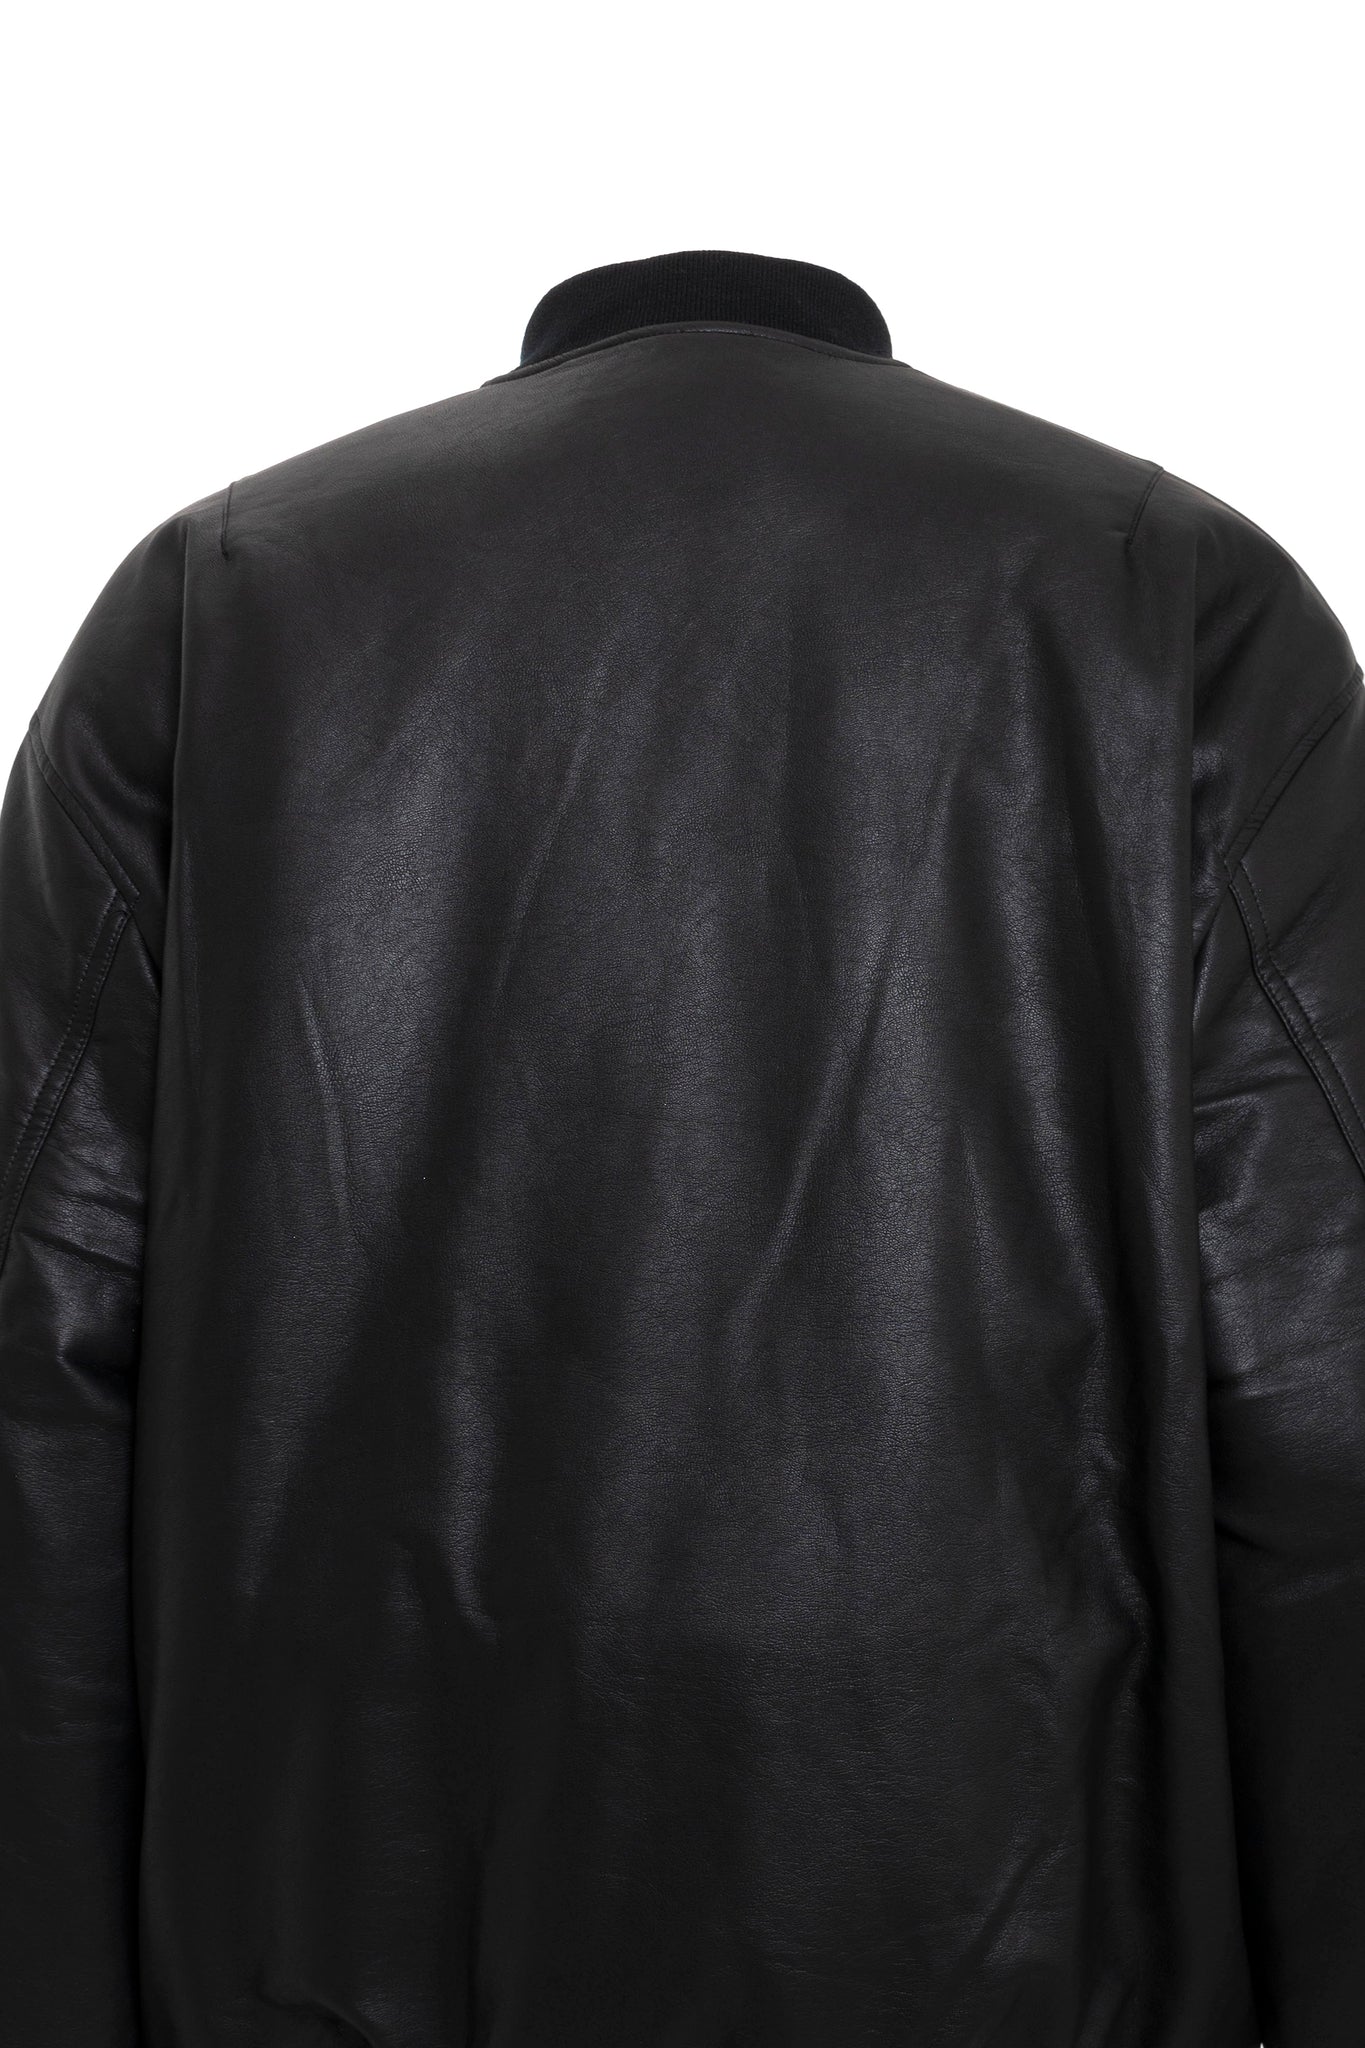 × F.M.C.D SYNTHETIC LEATHER BOMBER JACKET / BLACK